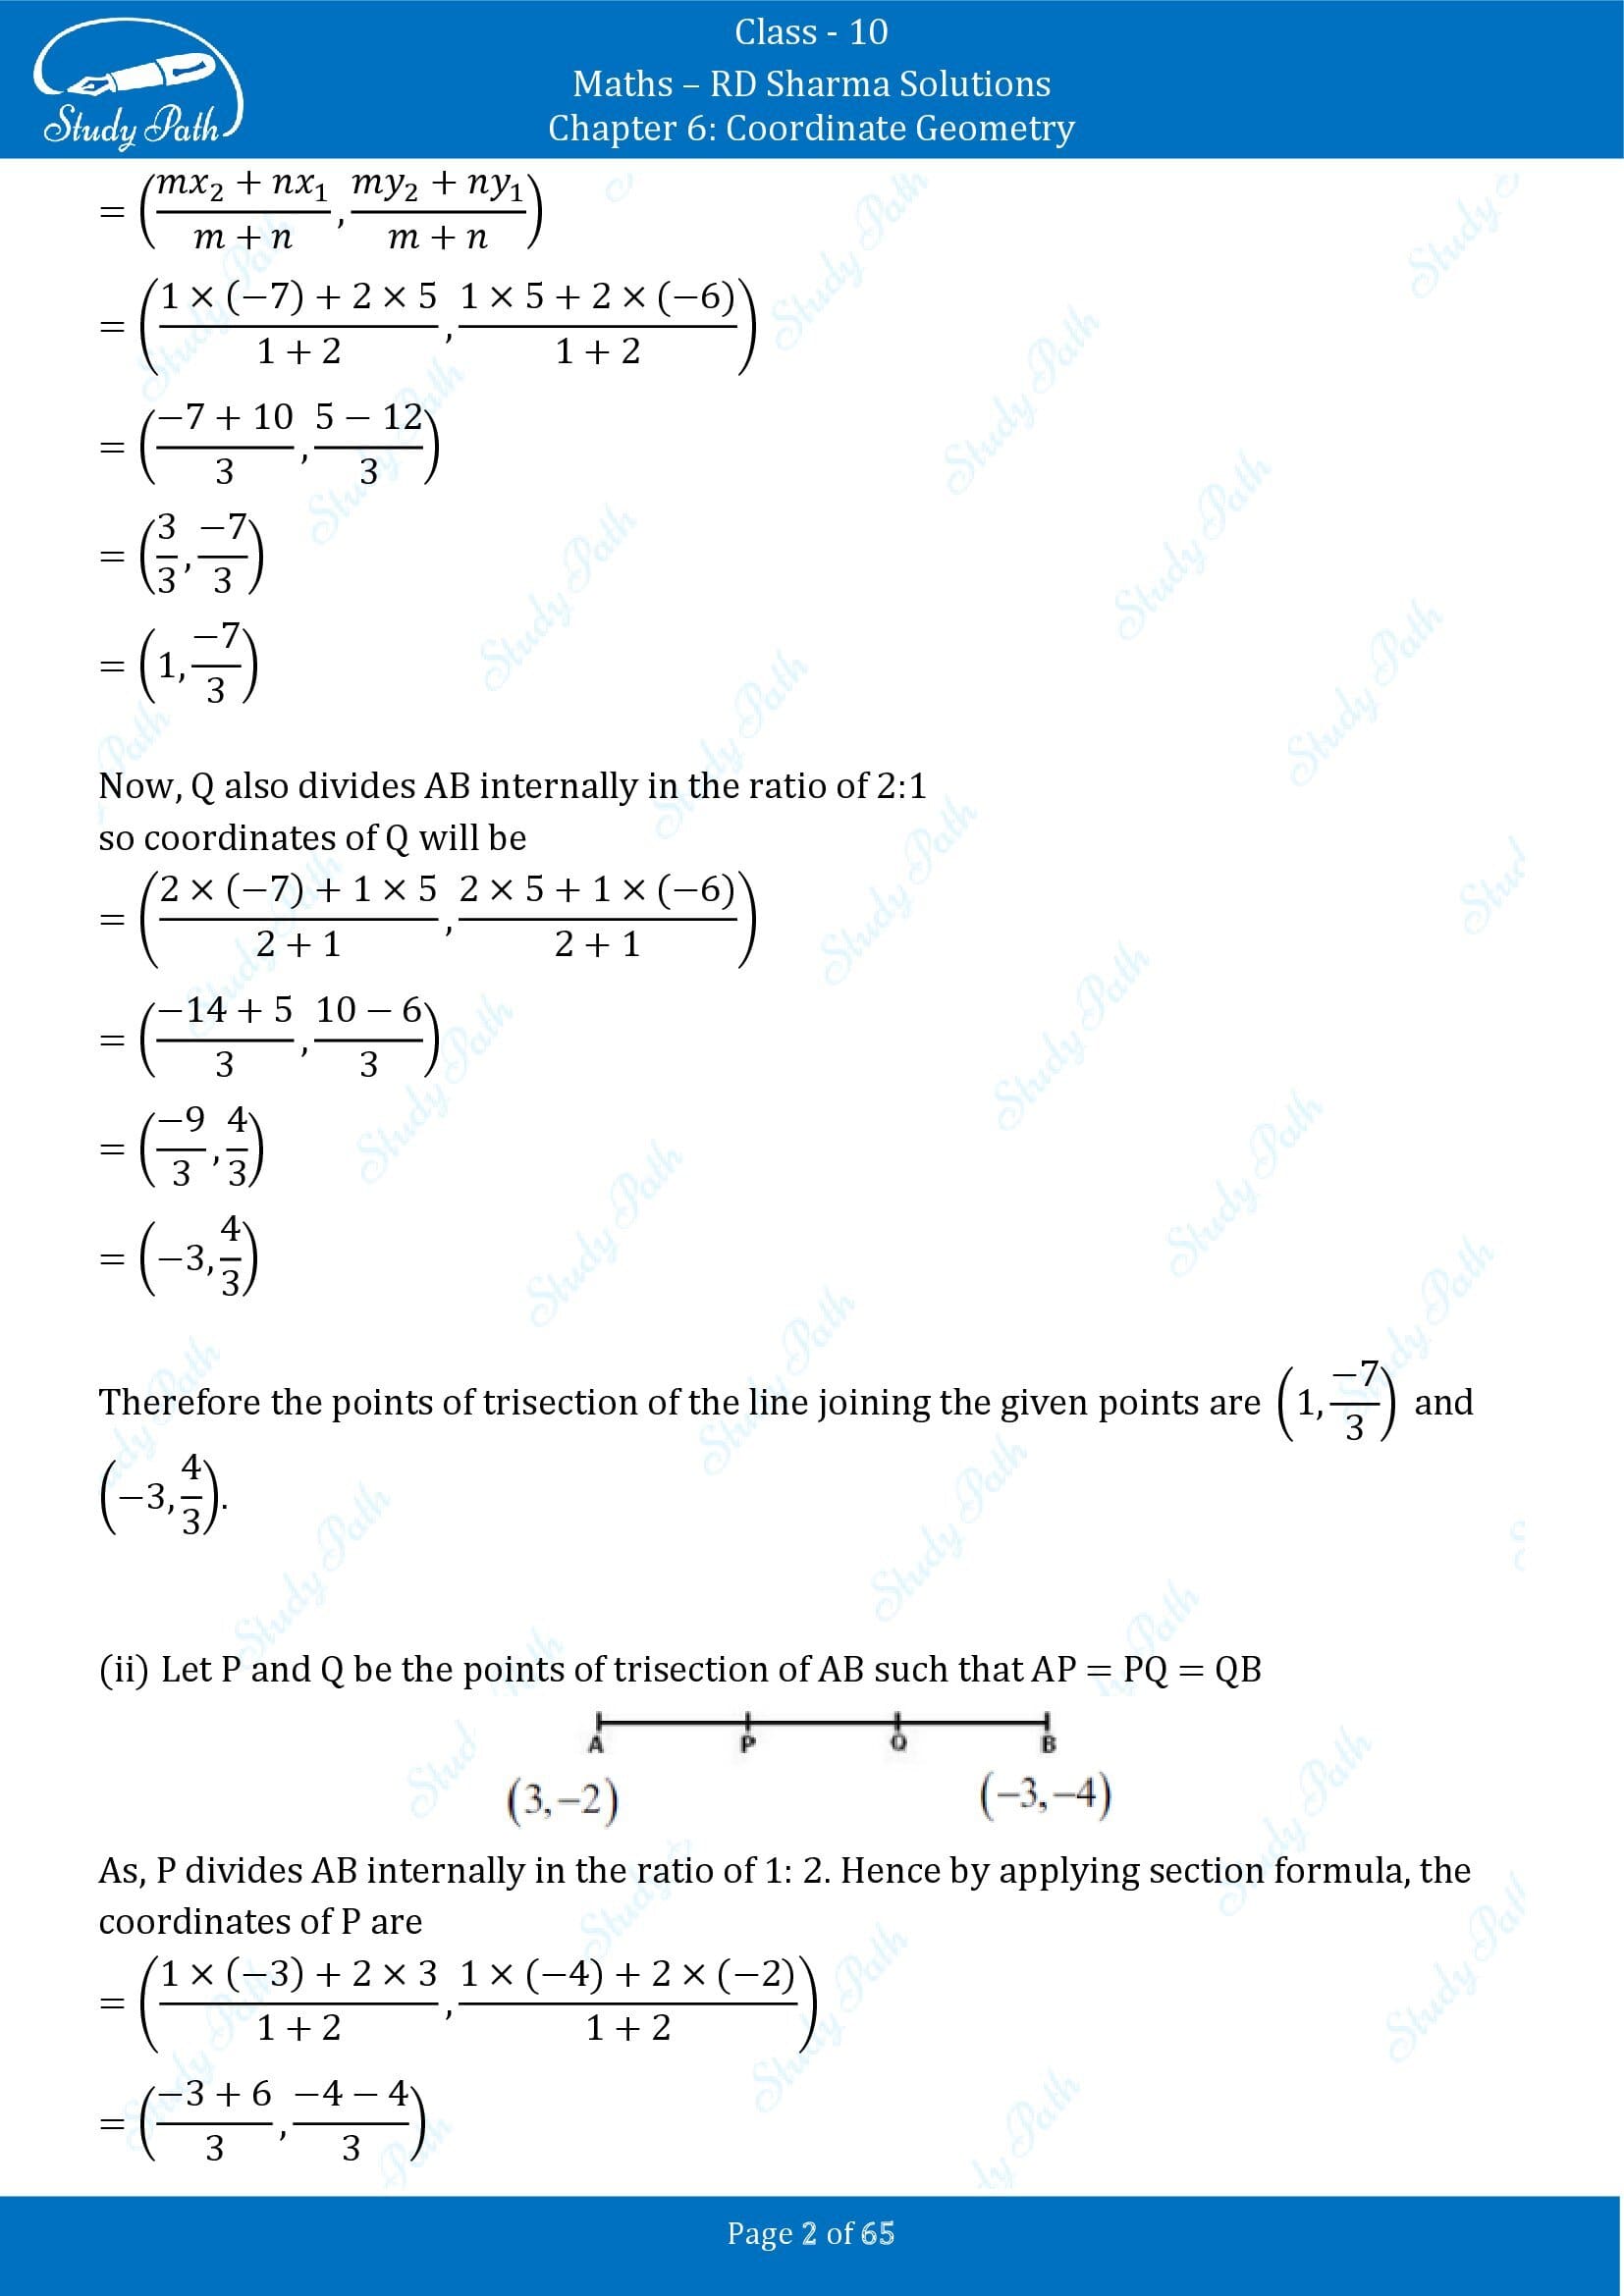 RD Sharma Solutions Class 10 Chapter 6 Coordinate Geometry Exercise 6.3 00002